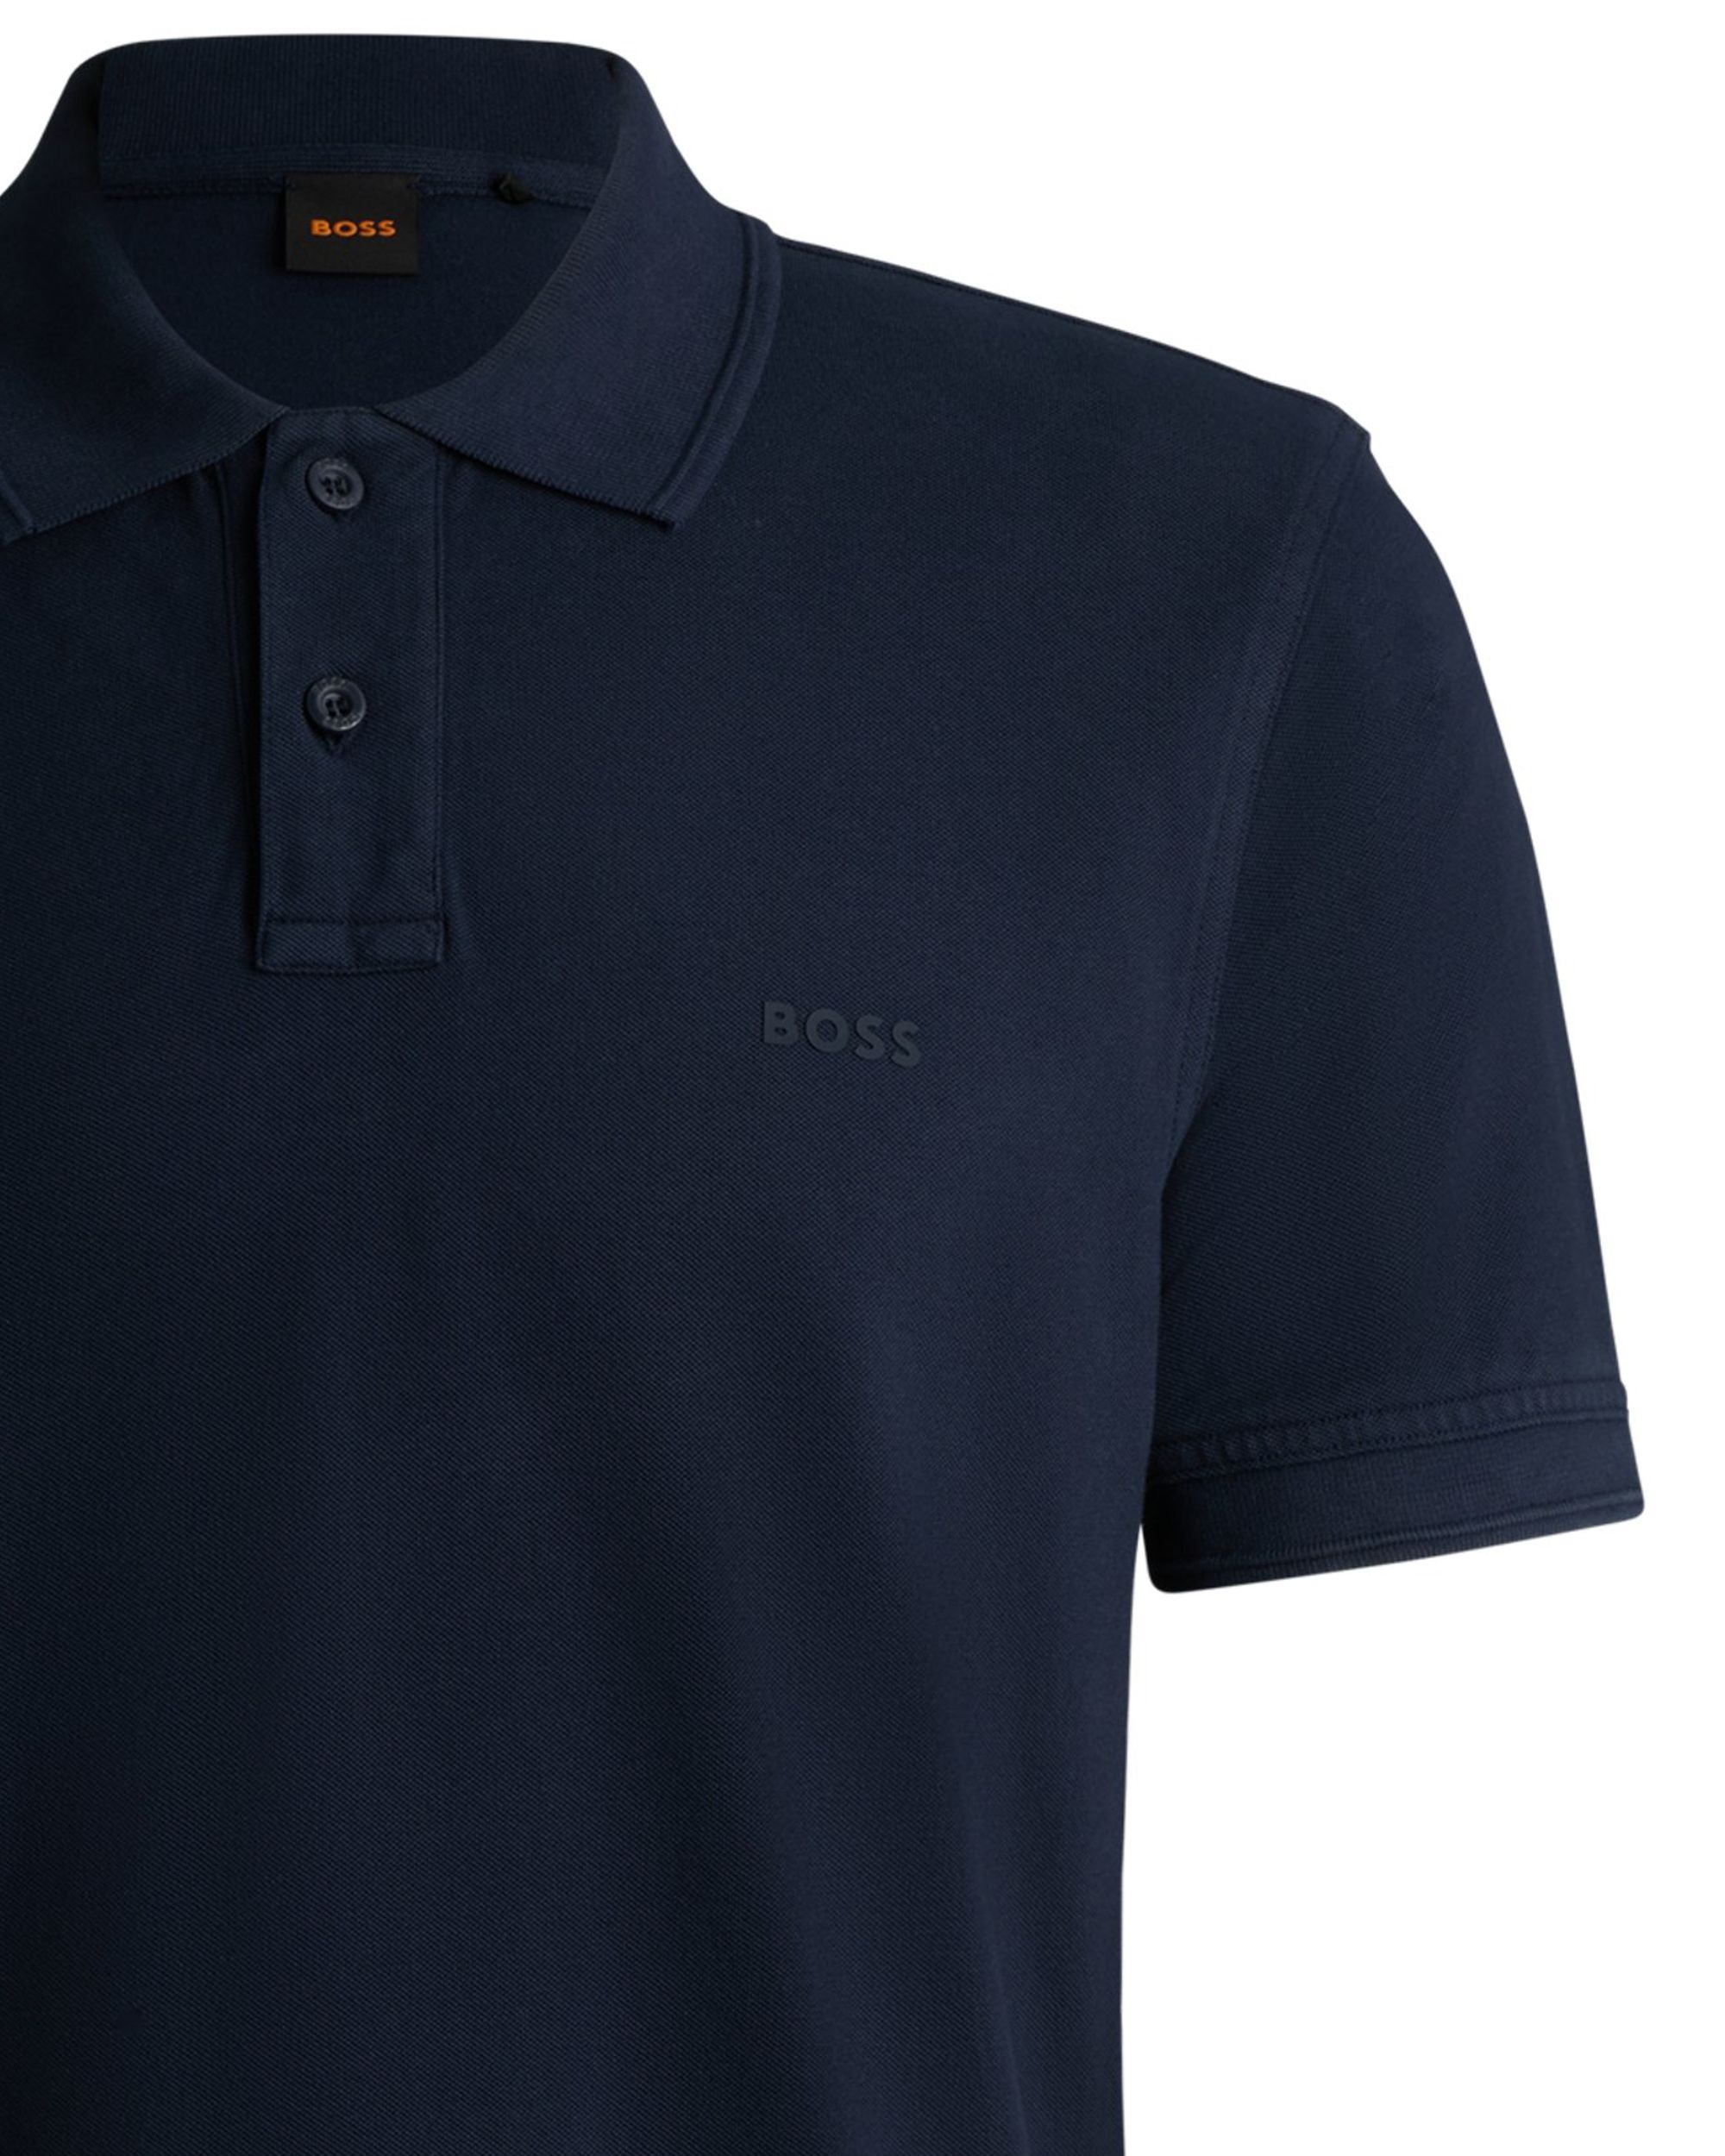 Boss Casual Prime Polo KM Donker blauw 095396-001-L